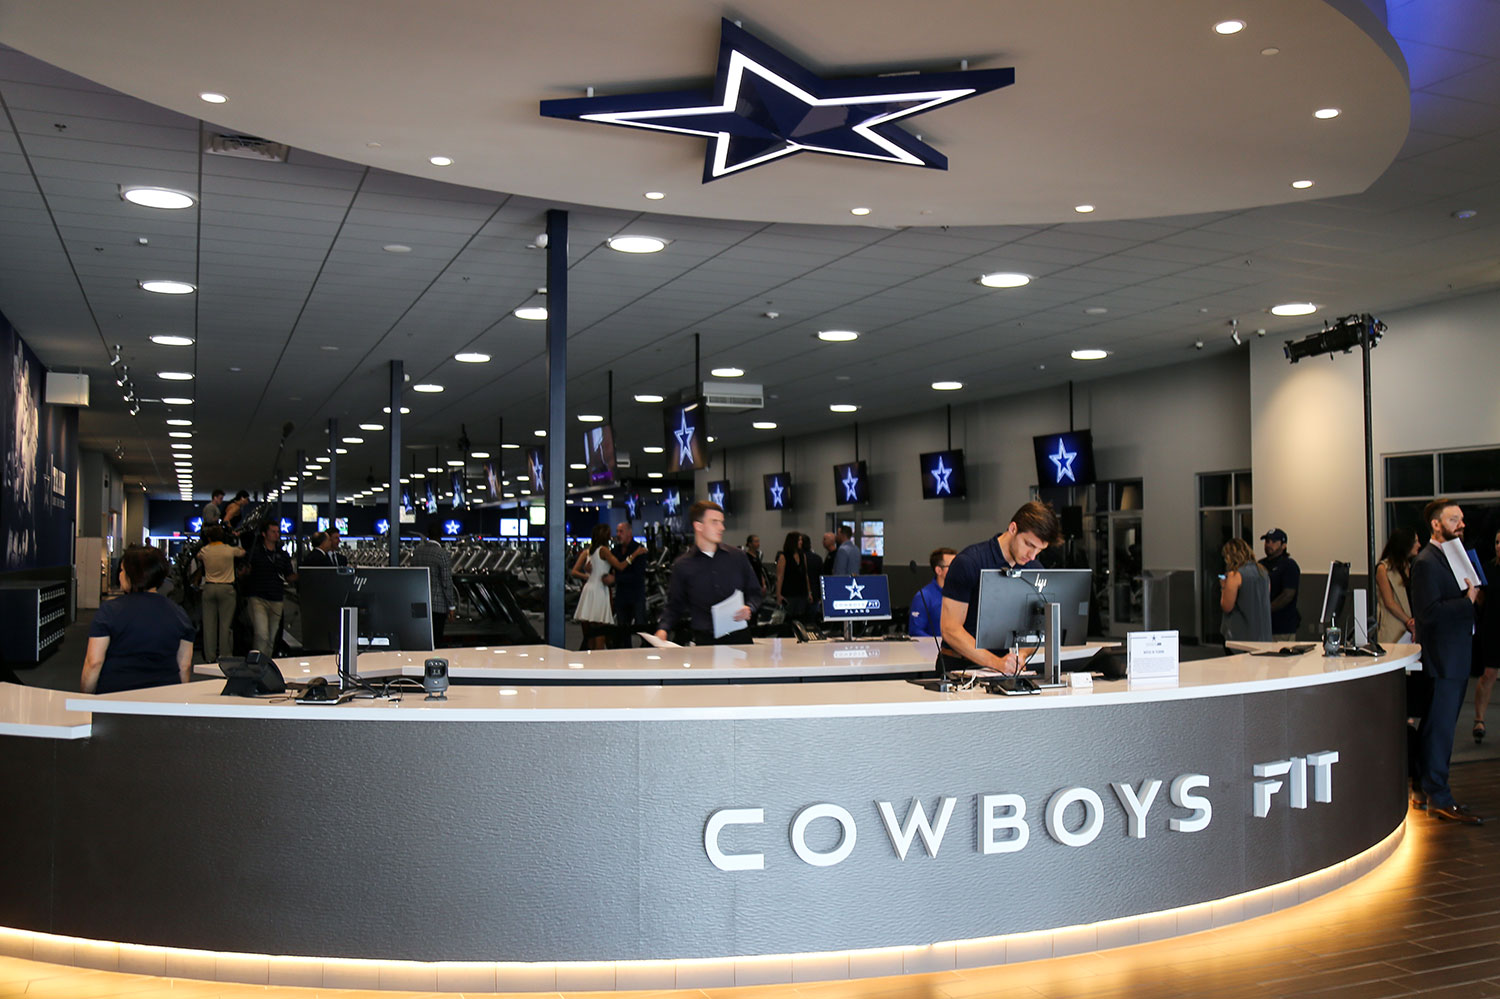 Cowboys Fit Gym in Plano Now Open - Plano Magazine